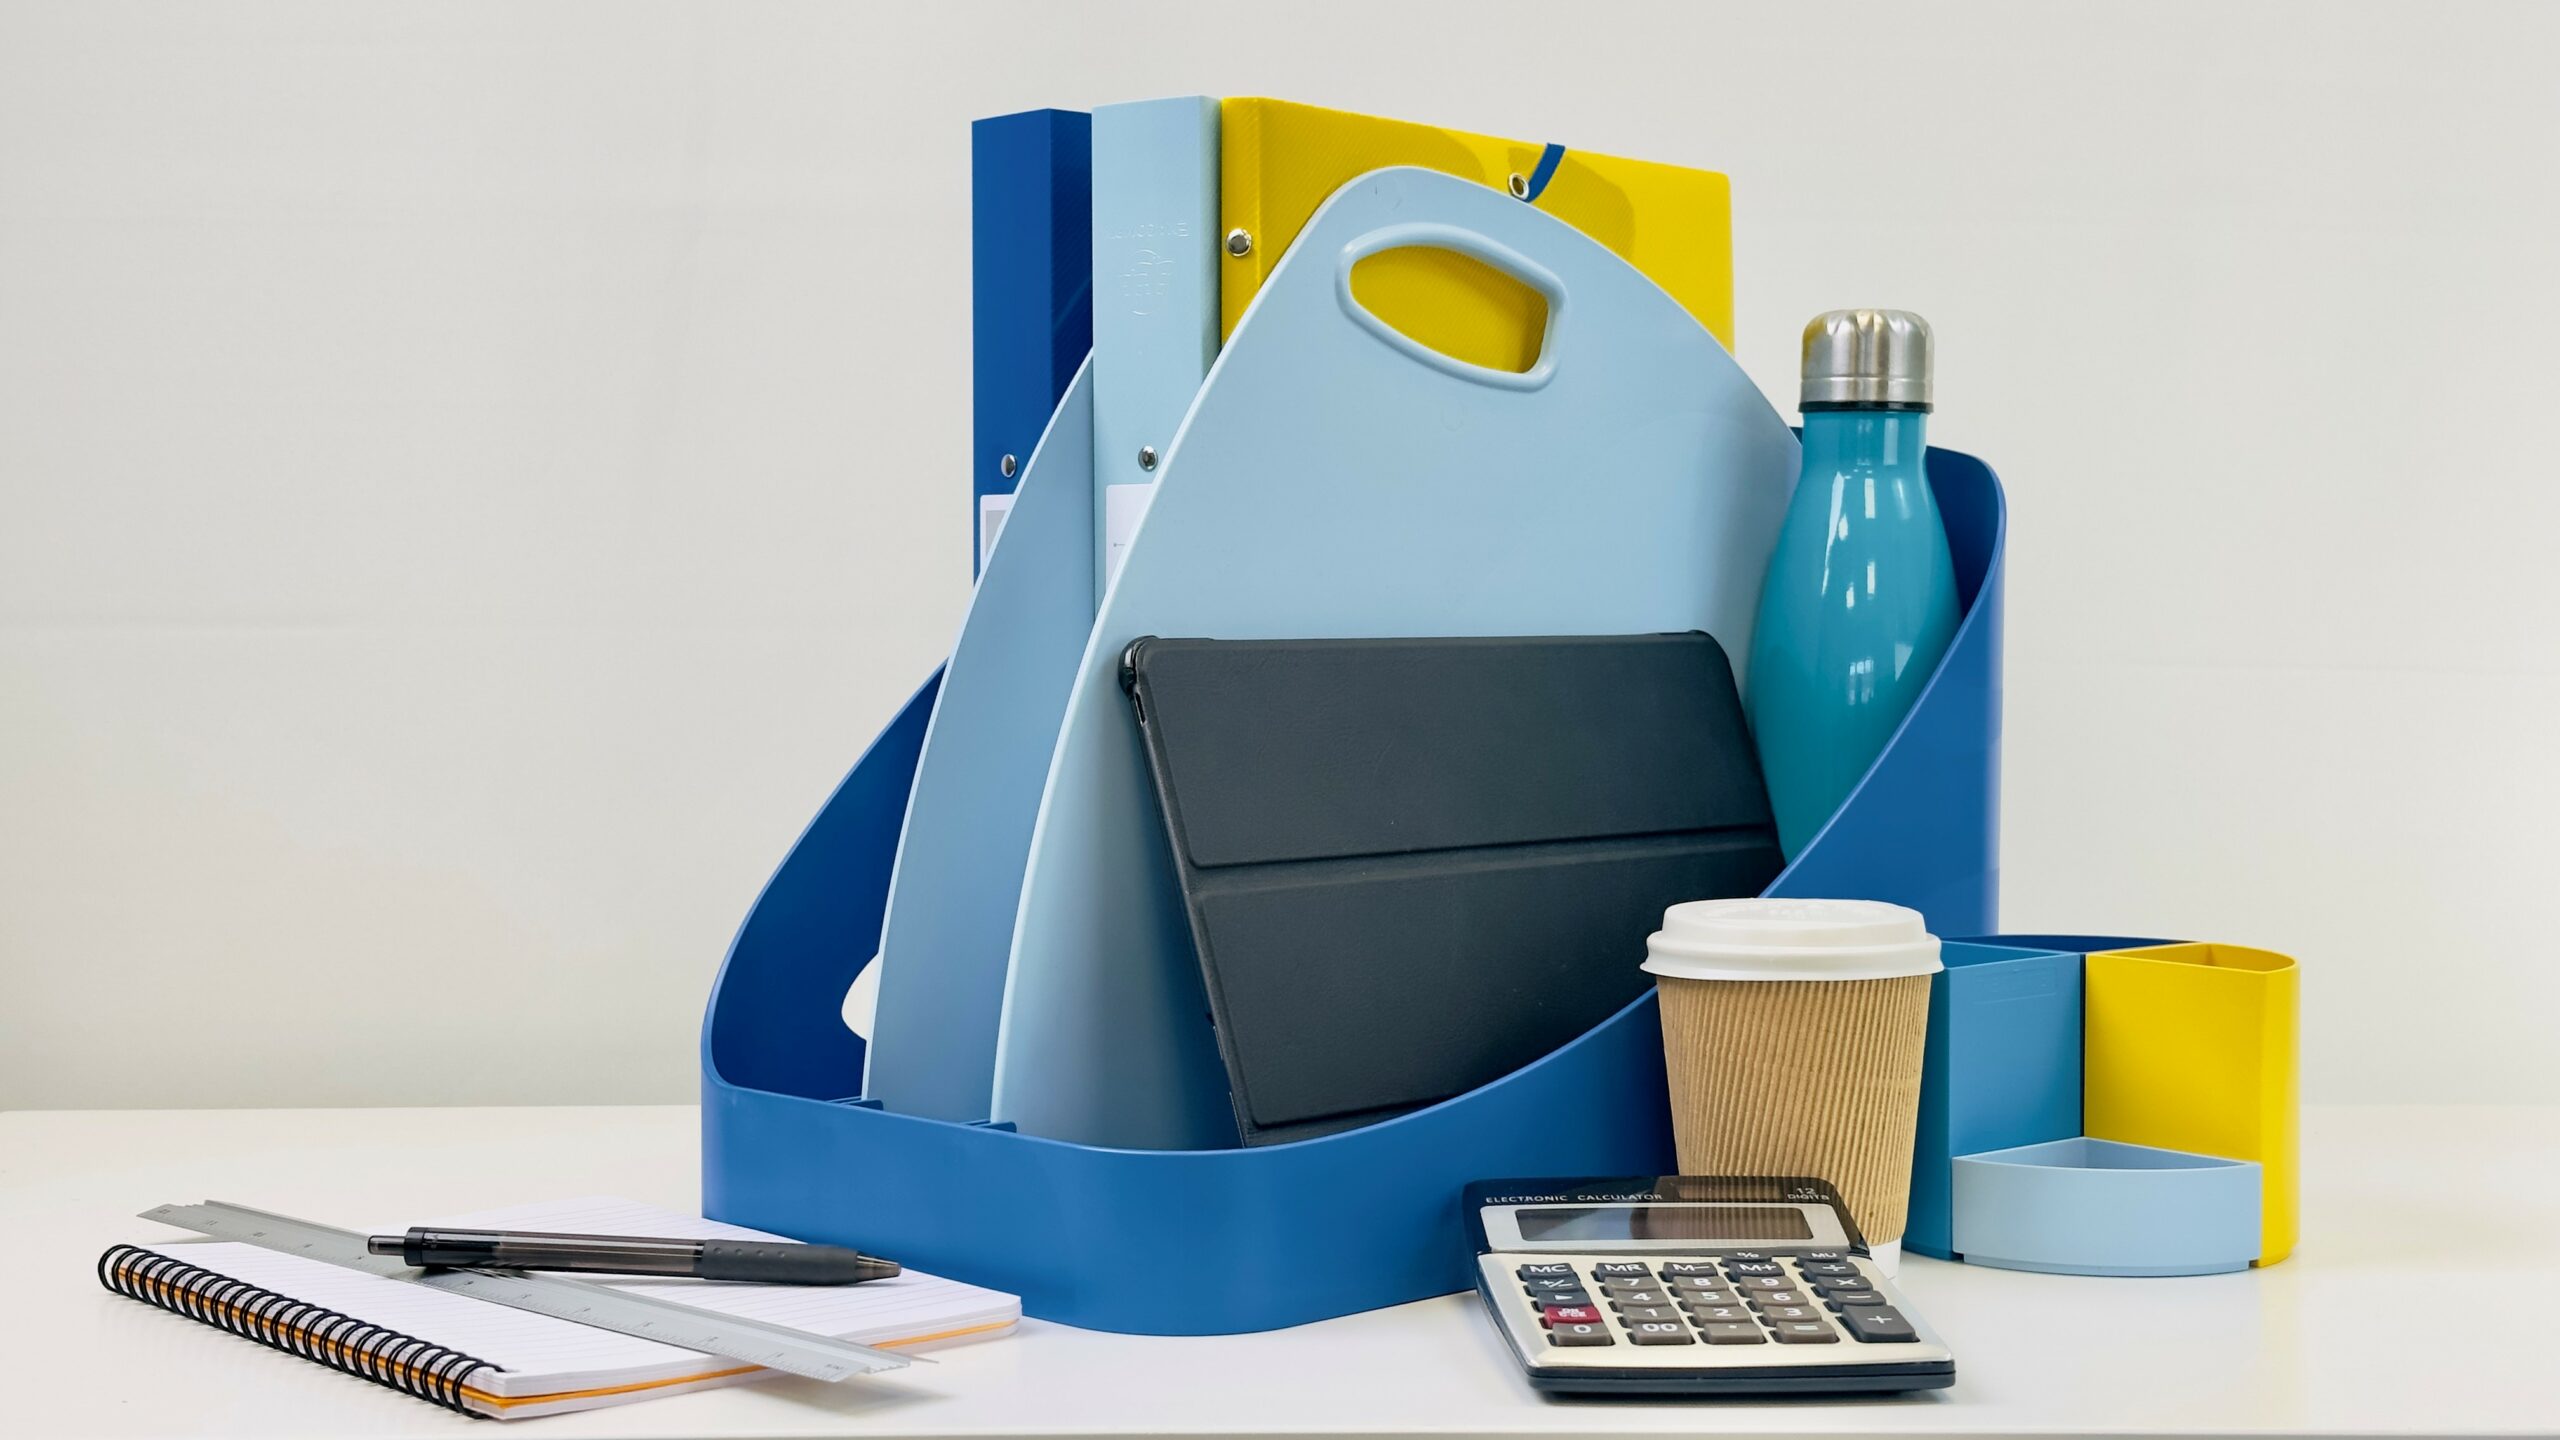 Exaclair Bee Blue FLEX BOX contains folders, a tablet and water bottle in shades of blue